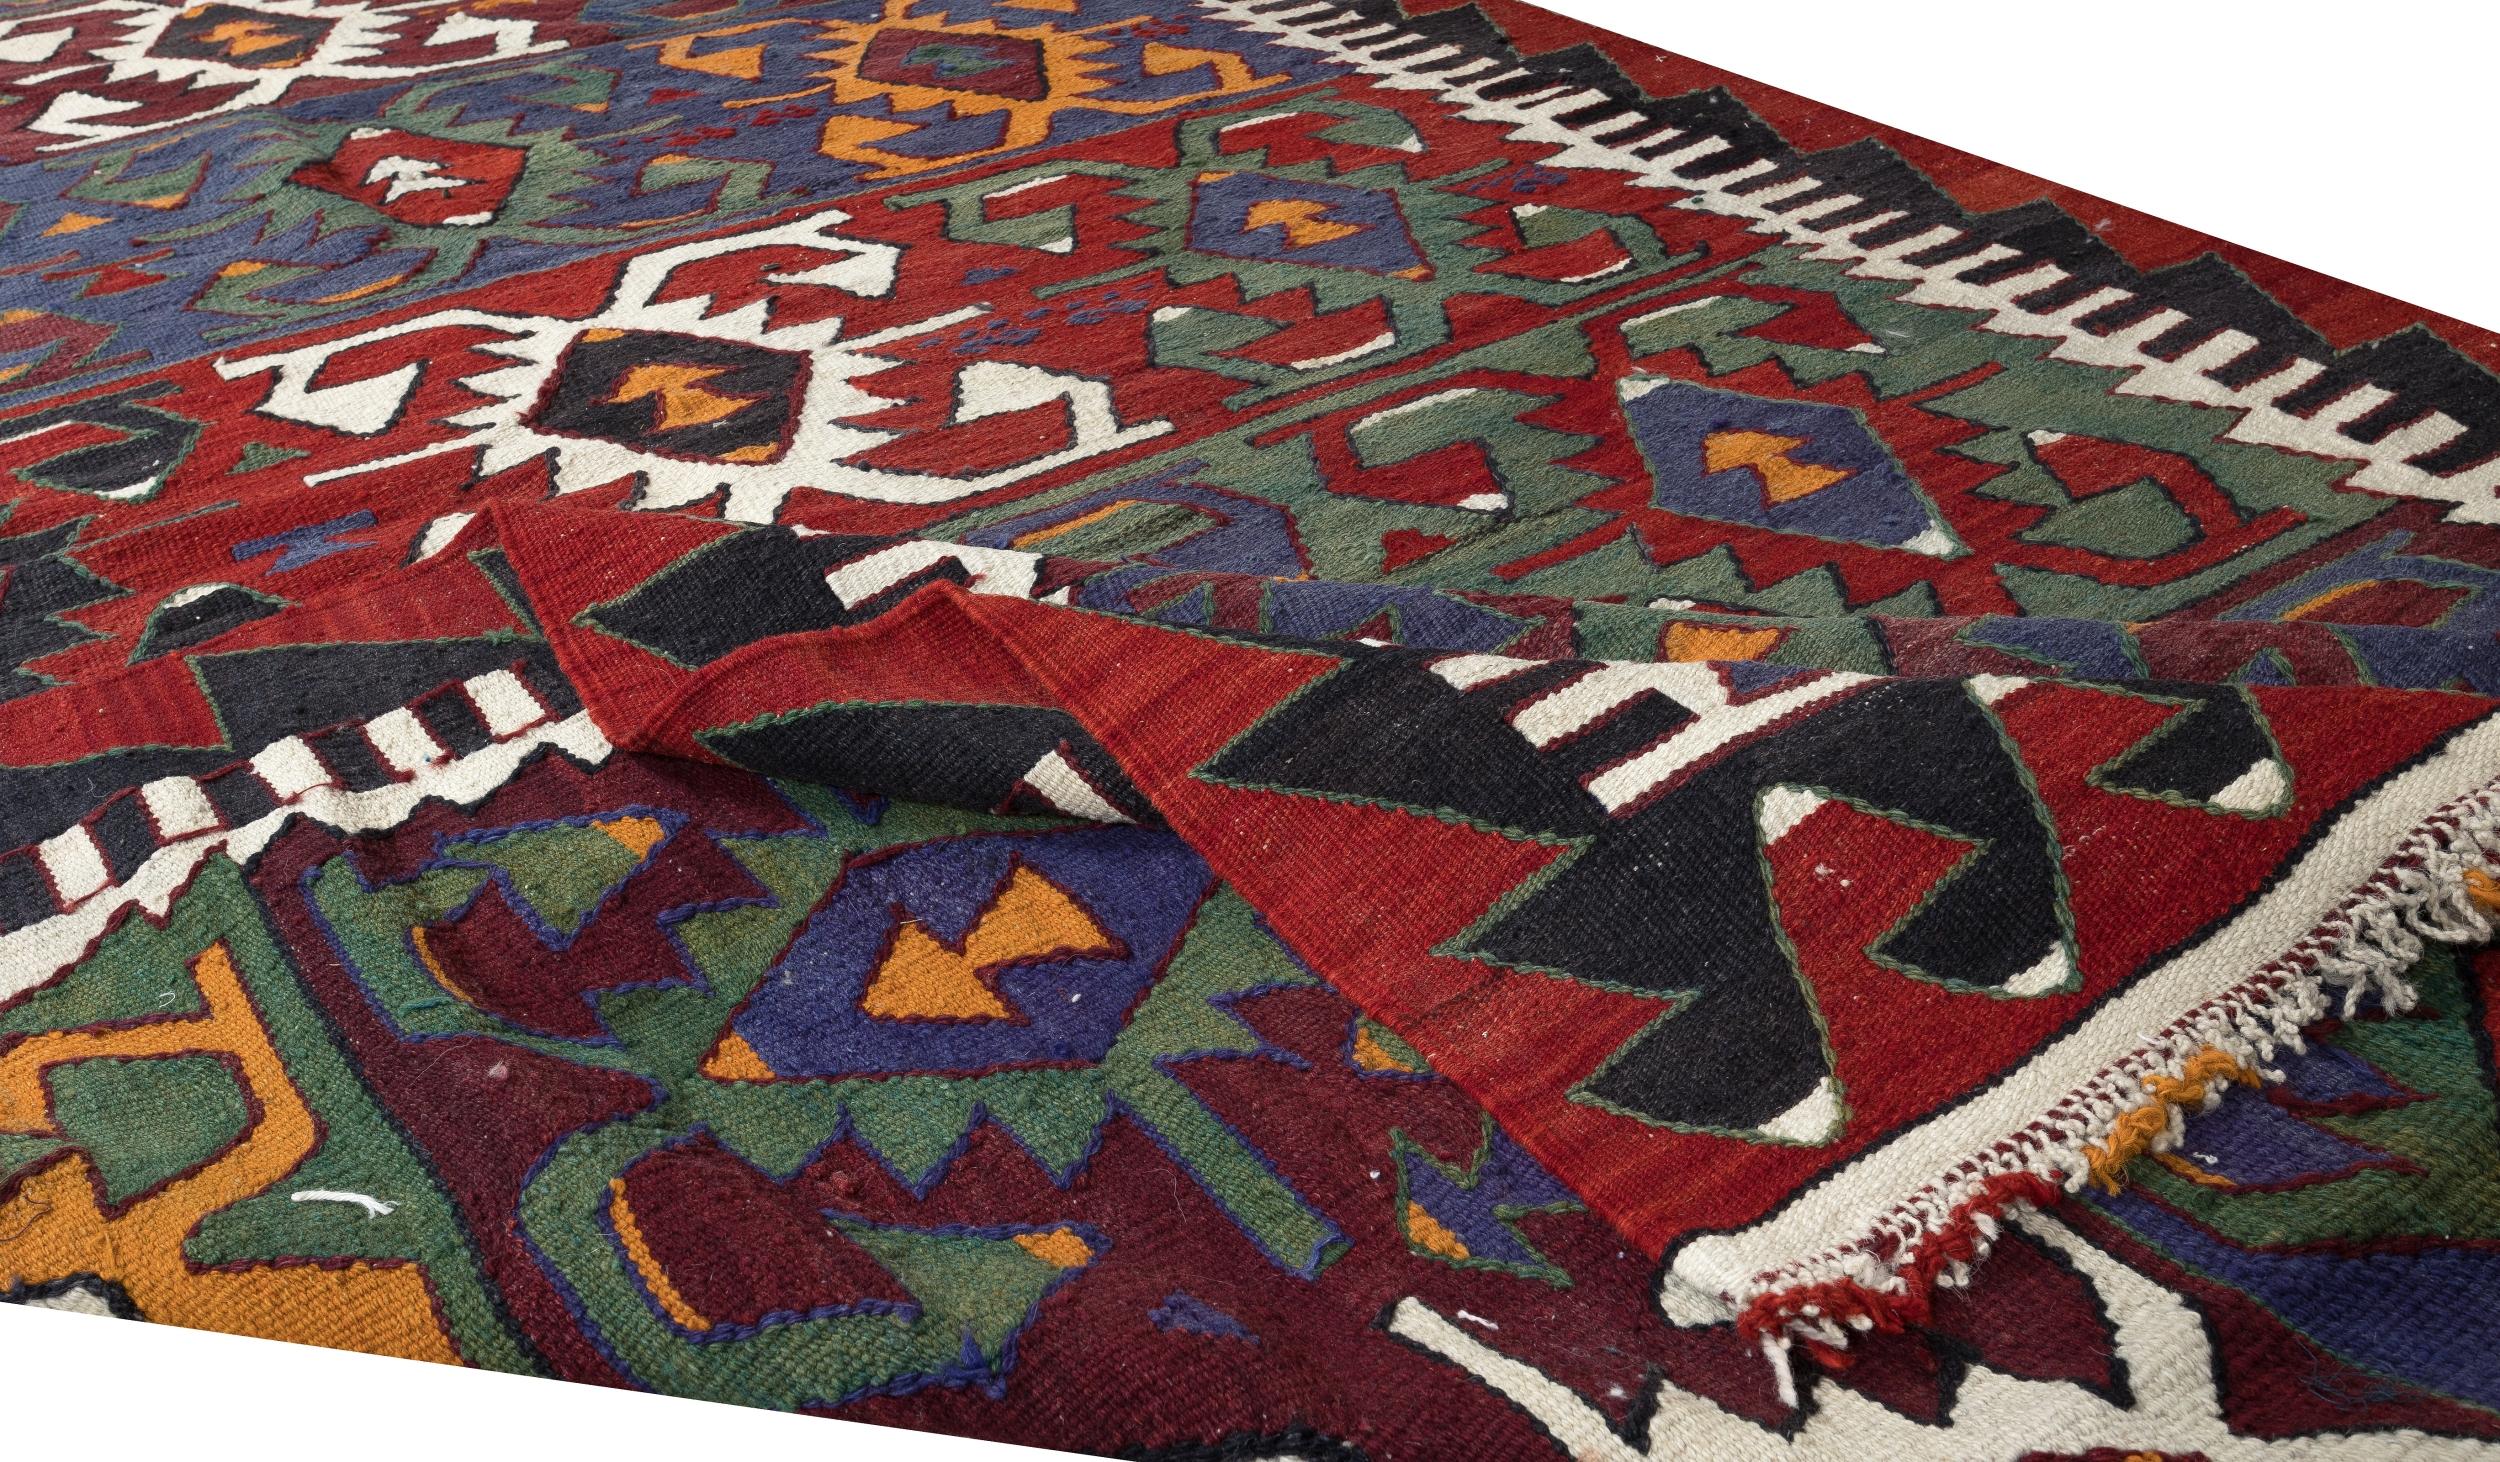 5.4x10.8 Ft Colorful Vintage Hand-Woven Turkish Kilim, Flat-Weave Rug, 100% Wool In Good Condition For Sale In Philadelphia, PA